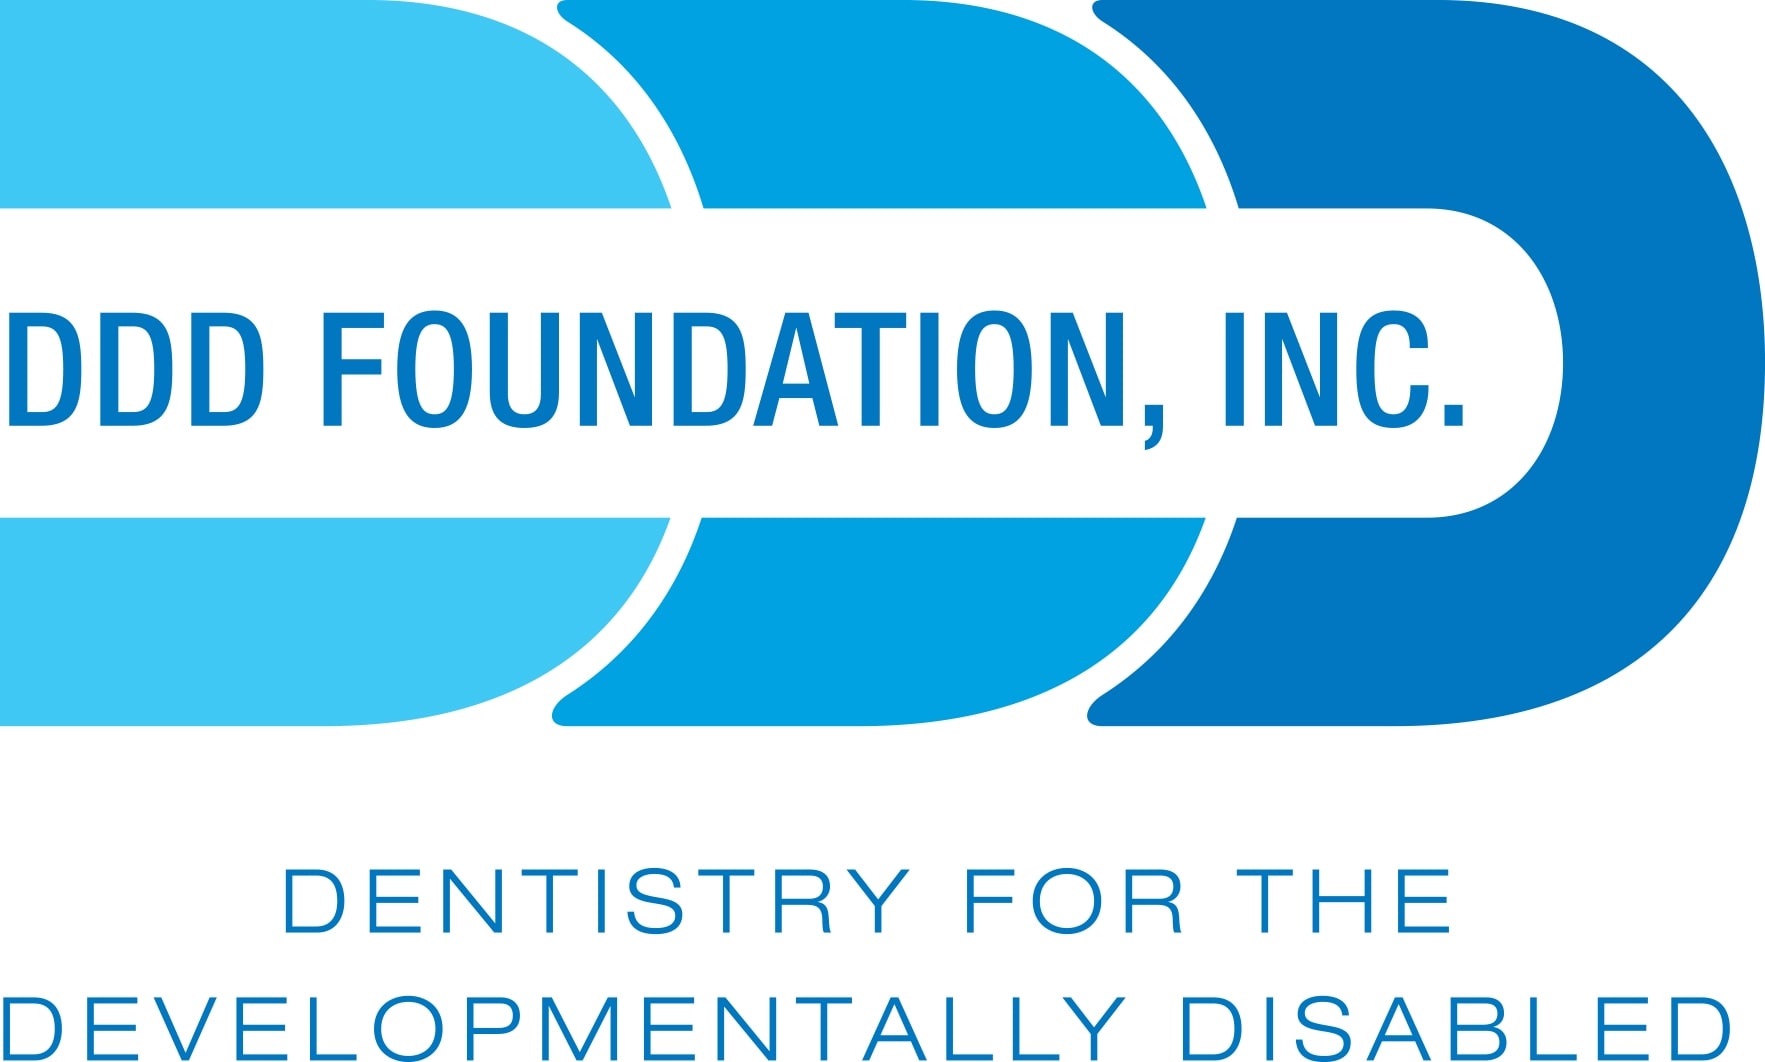 DDD Foundation, Inc. (Dentistry for the Developmentally Disabled)